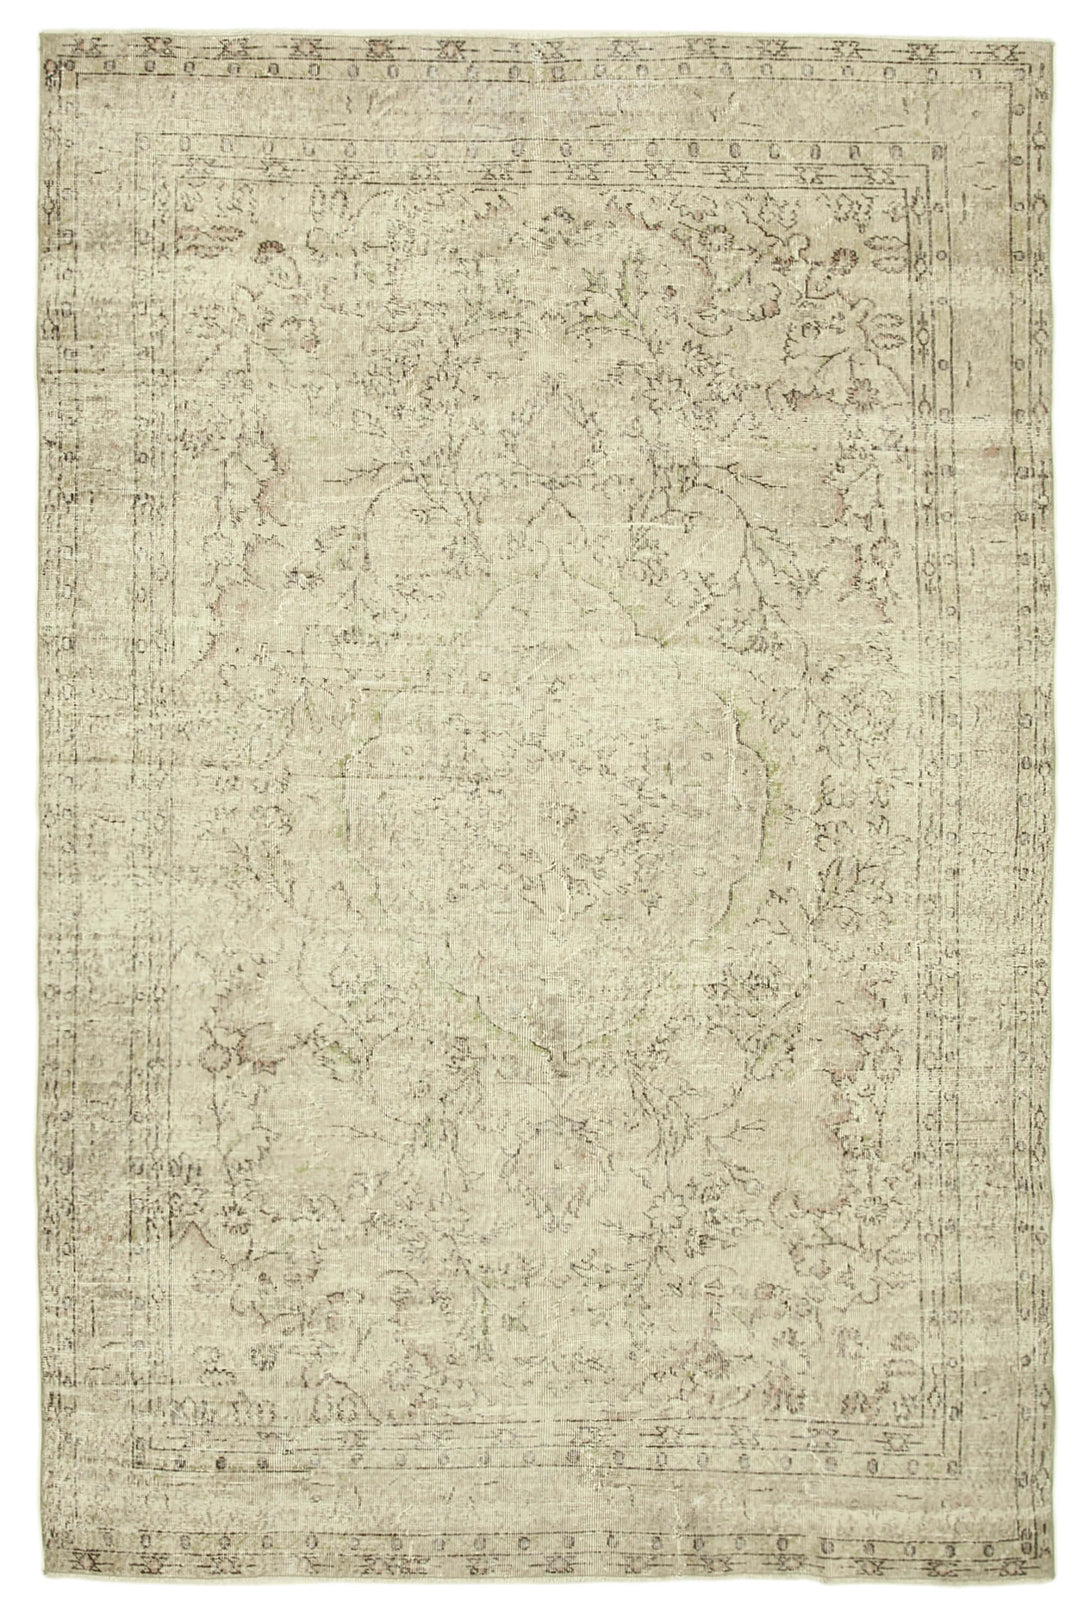 Handmade White Wash Area Rug > Design# OL-AC-38863 > Size: 6'-10" x 10'-5", Carpet Culture Rugs, Handmade Rugs, NYC Rugs, New Rugs, Shop Rugs, Rug Store, Outlet Rugs, SoHo Rugs, Rugs in USA